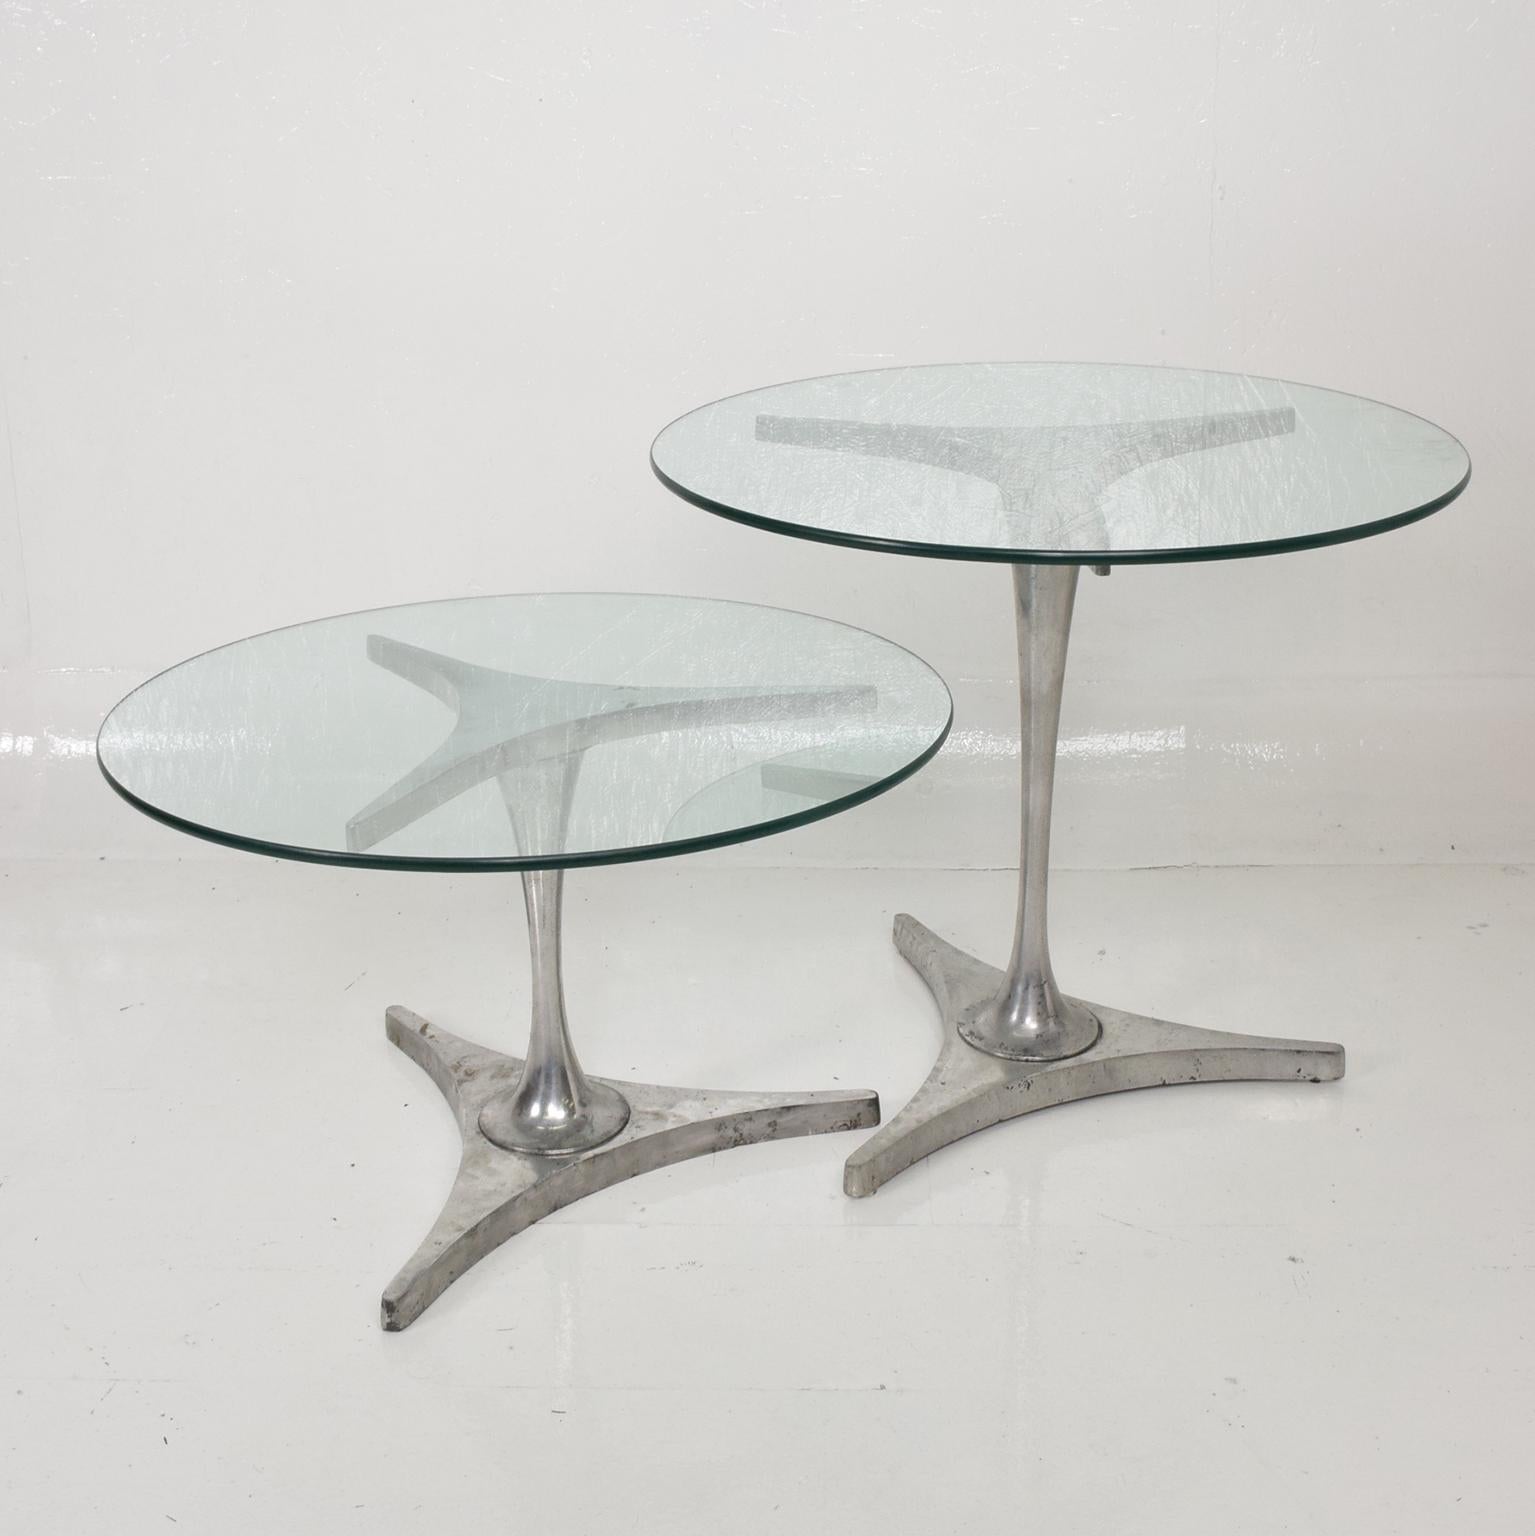 For your consideration, a Mid-Century Modern set of aluminum nesting tables.
Dimensions: 14 1/2